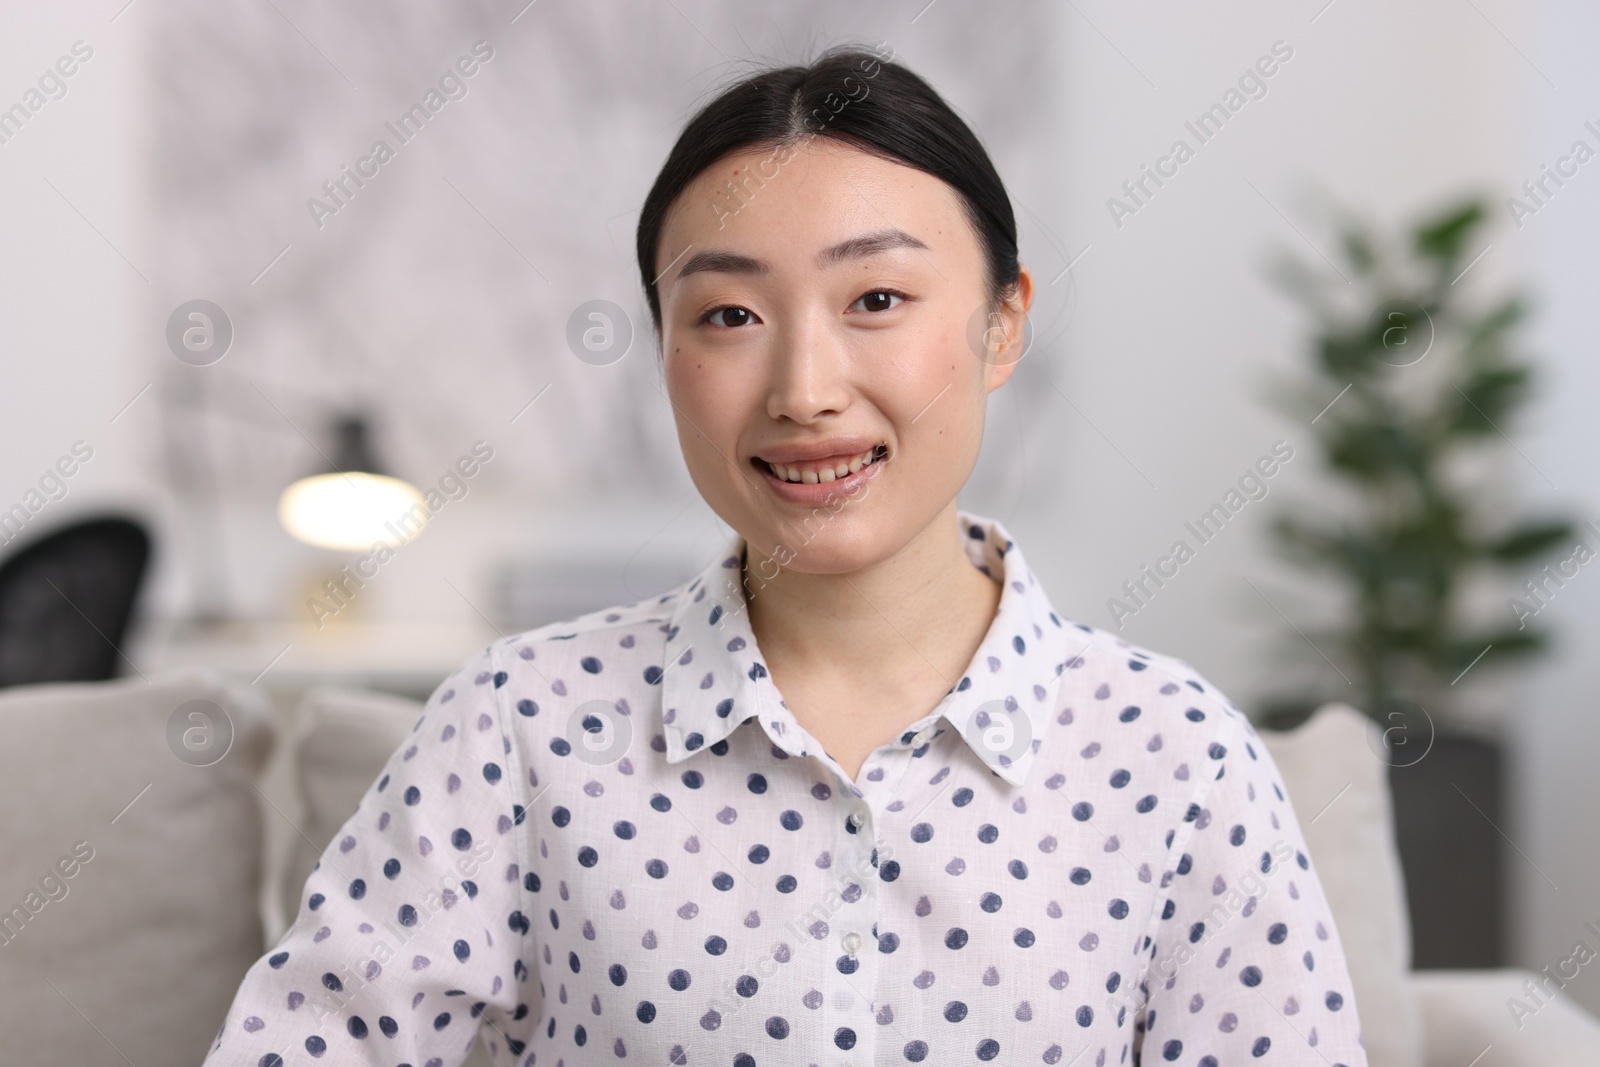 Photo of Portrait of smiling businesswoman wearing shirt in office